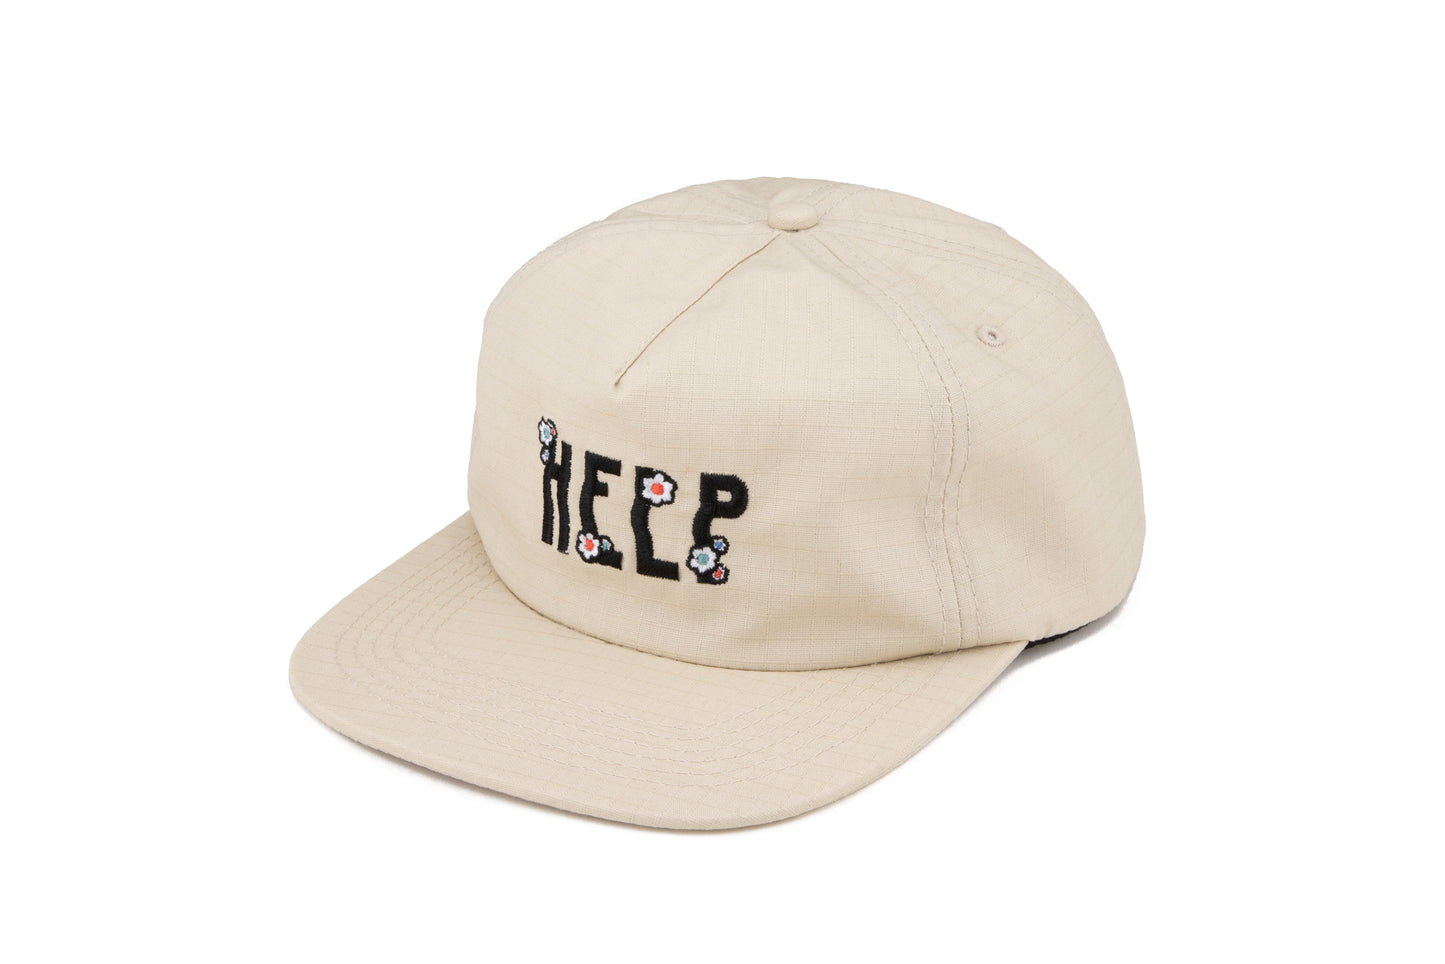 Stone colored 5 panel hat with an embroidered design that says "Help" on the front. The design includes flower embroidery on top of each letter. The material is ripstop cotton. 